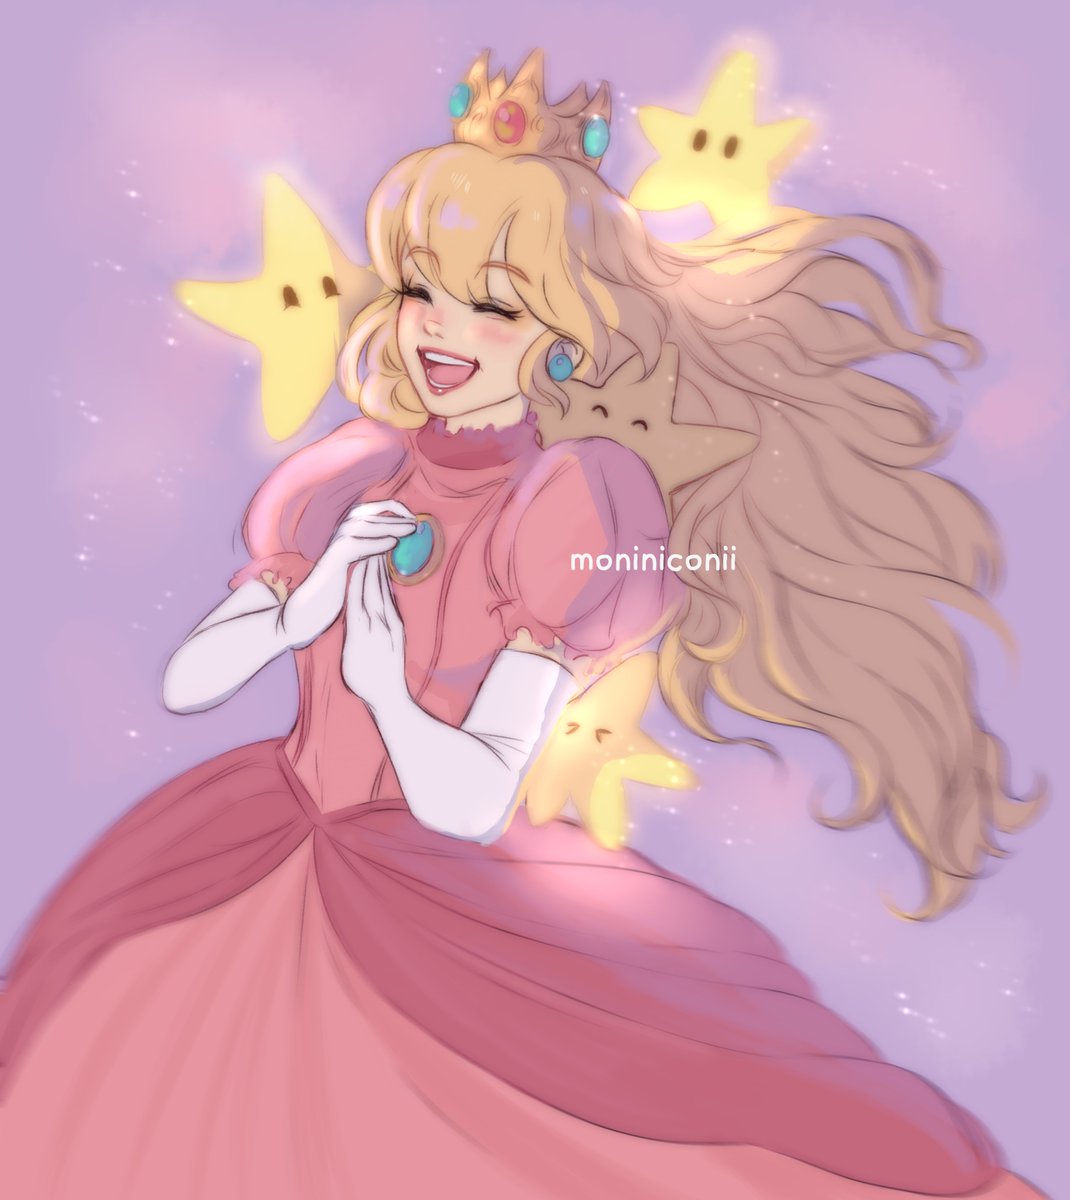 'Let's bring our princess back to her castle!' 🩷⭐💫 #supermario #peach #fanart